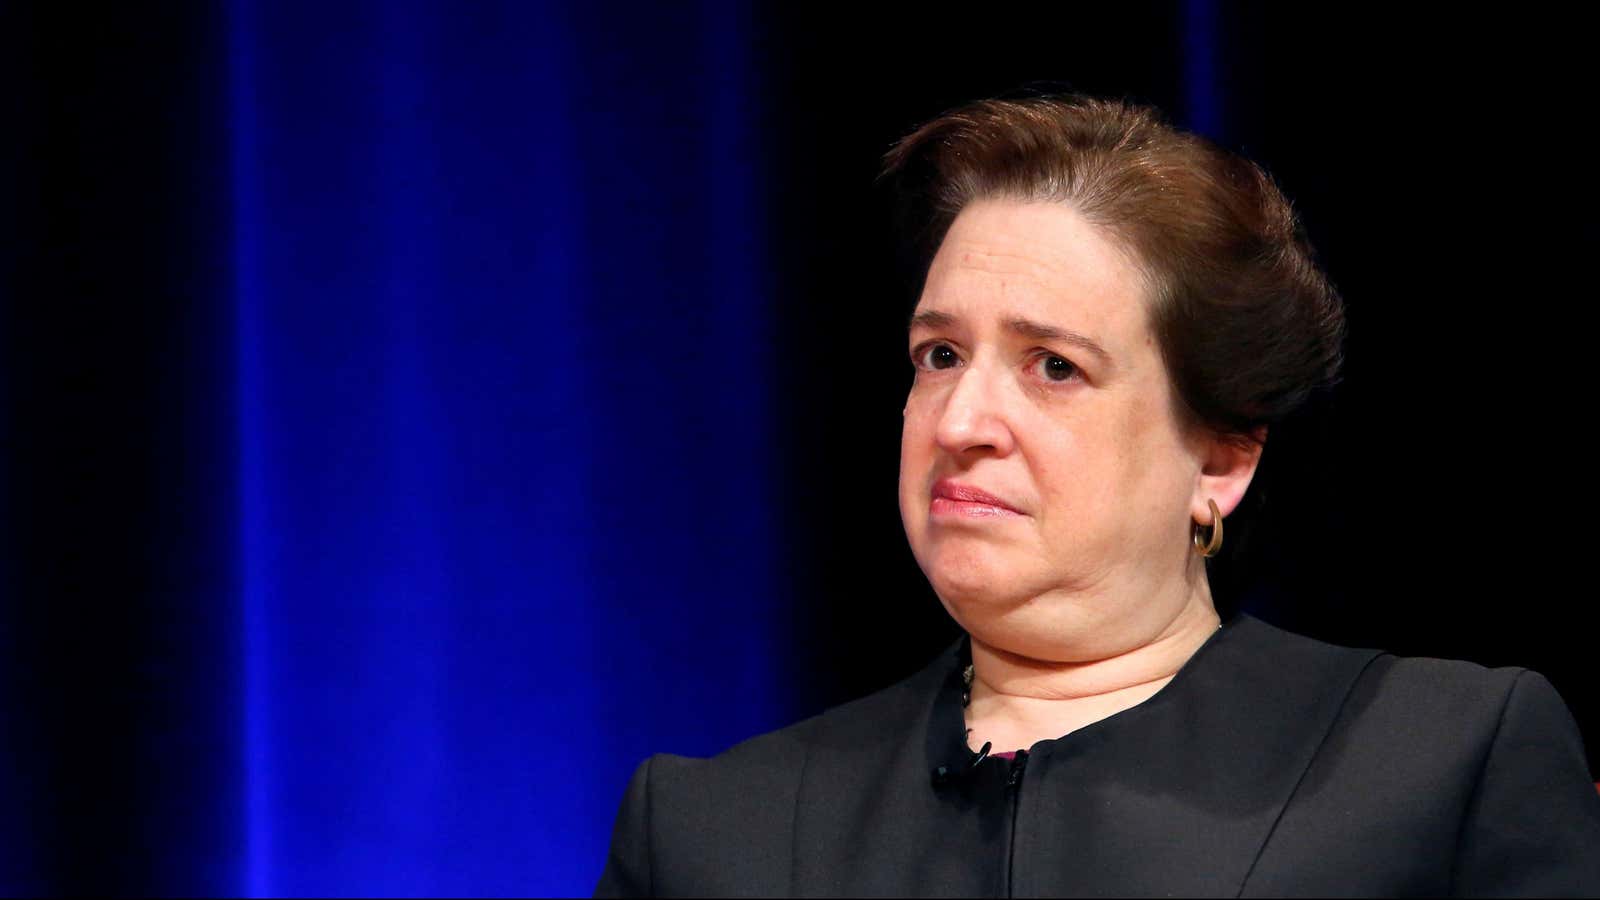 Supreme court justice Elena Kagan was skeptical about Trump’s travel ban.